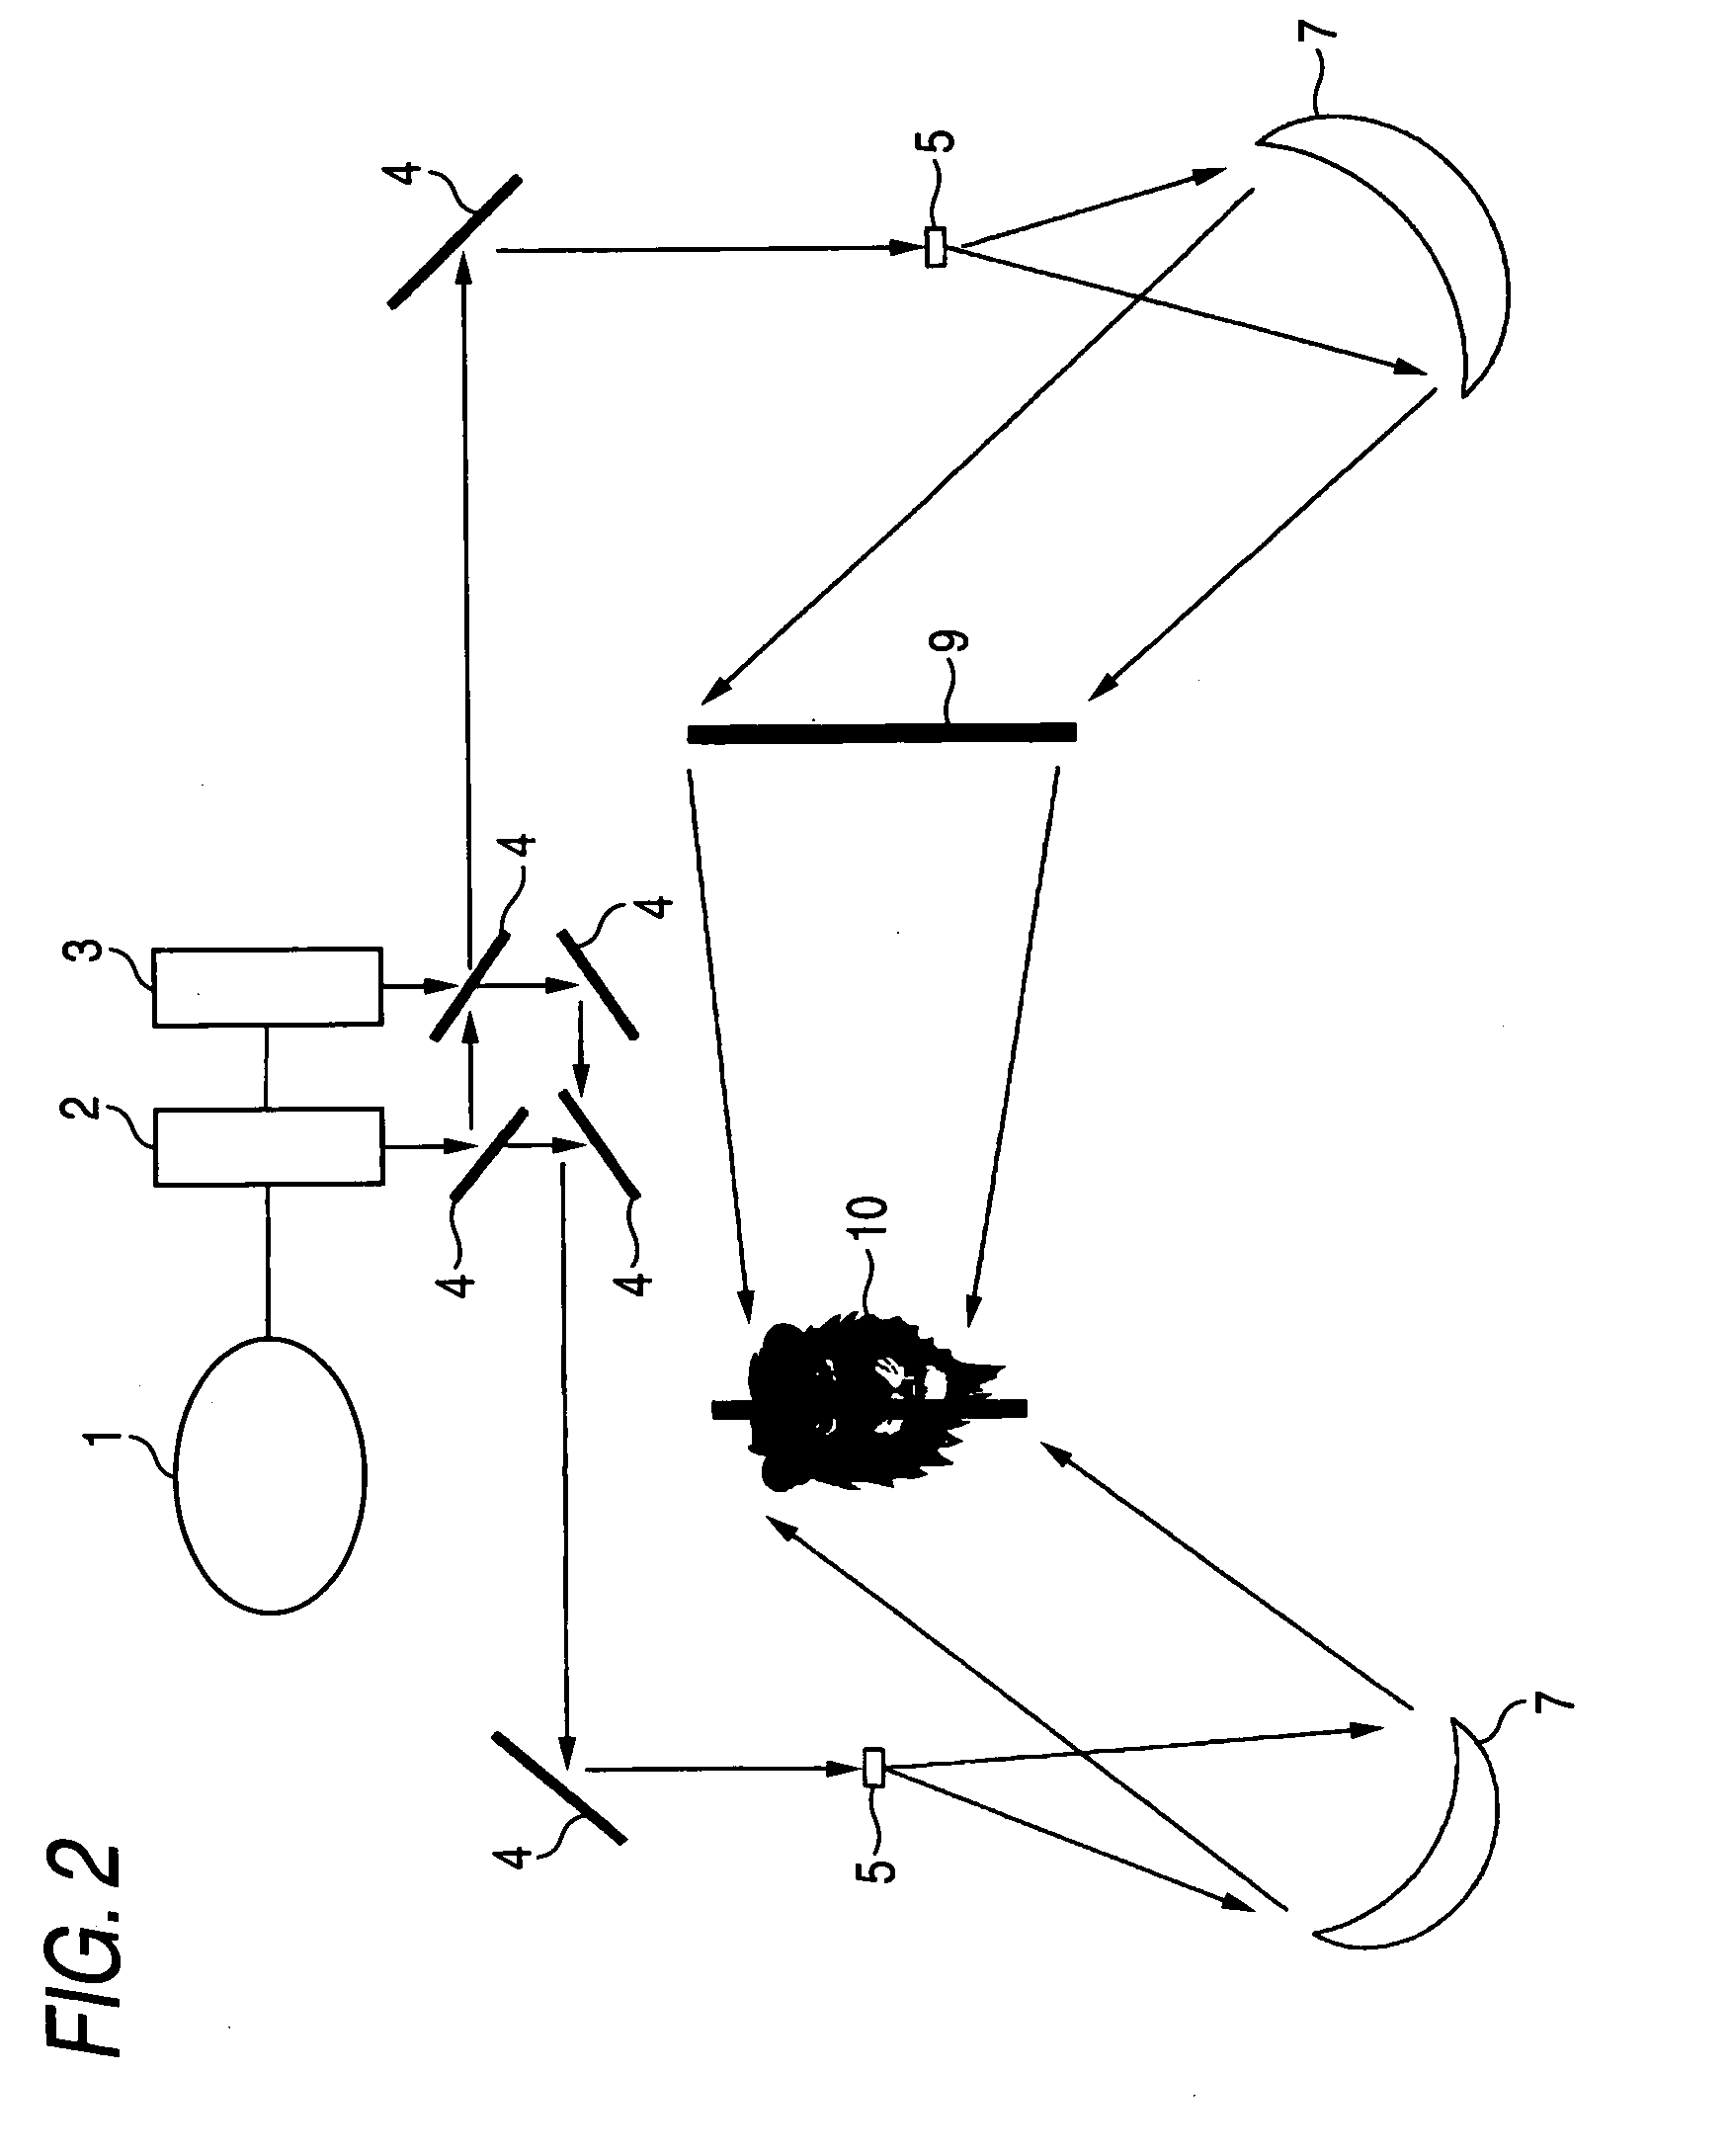 Silver halide holographic sensitive material and system for taking holographic images by using the same